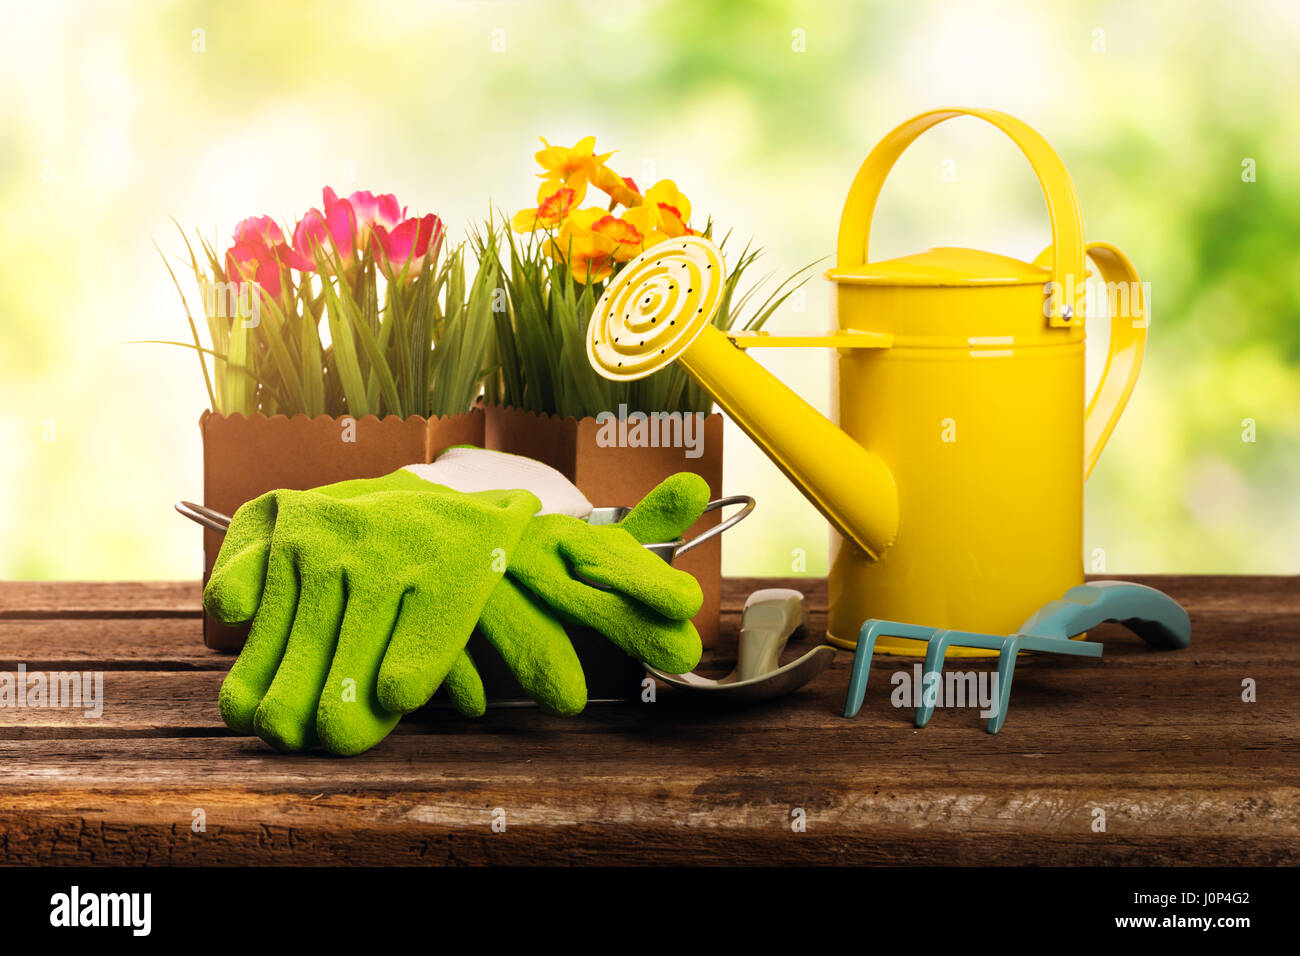 gardening tools and flowers on old wooden table in garden Stock Photo